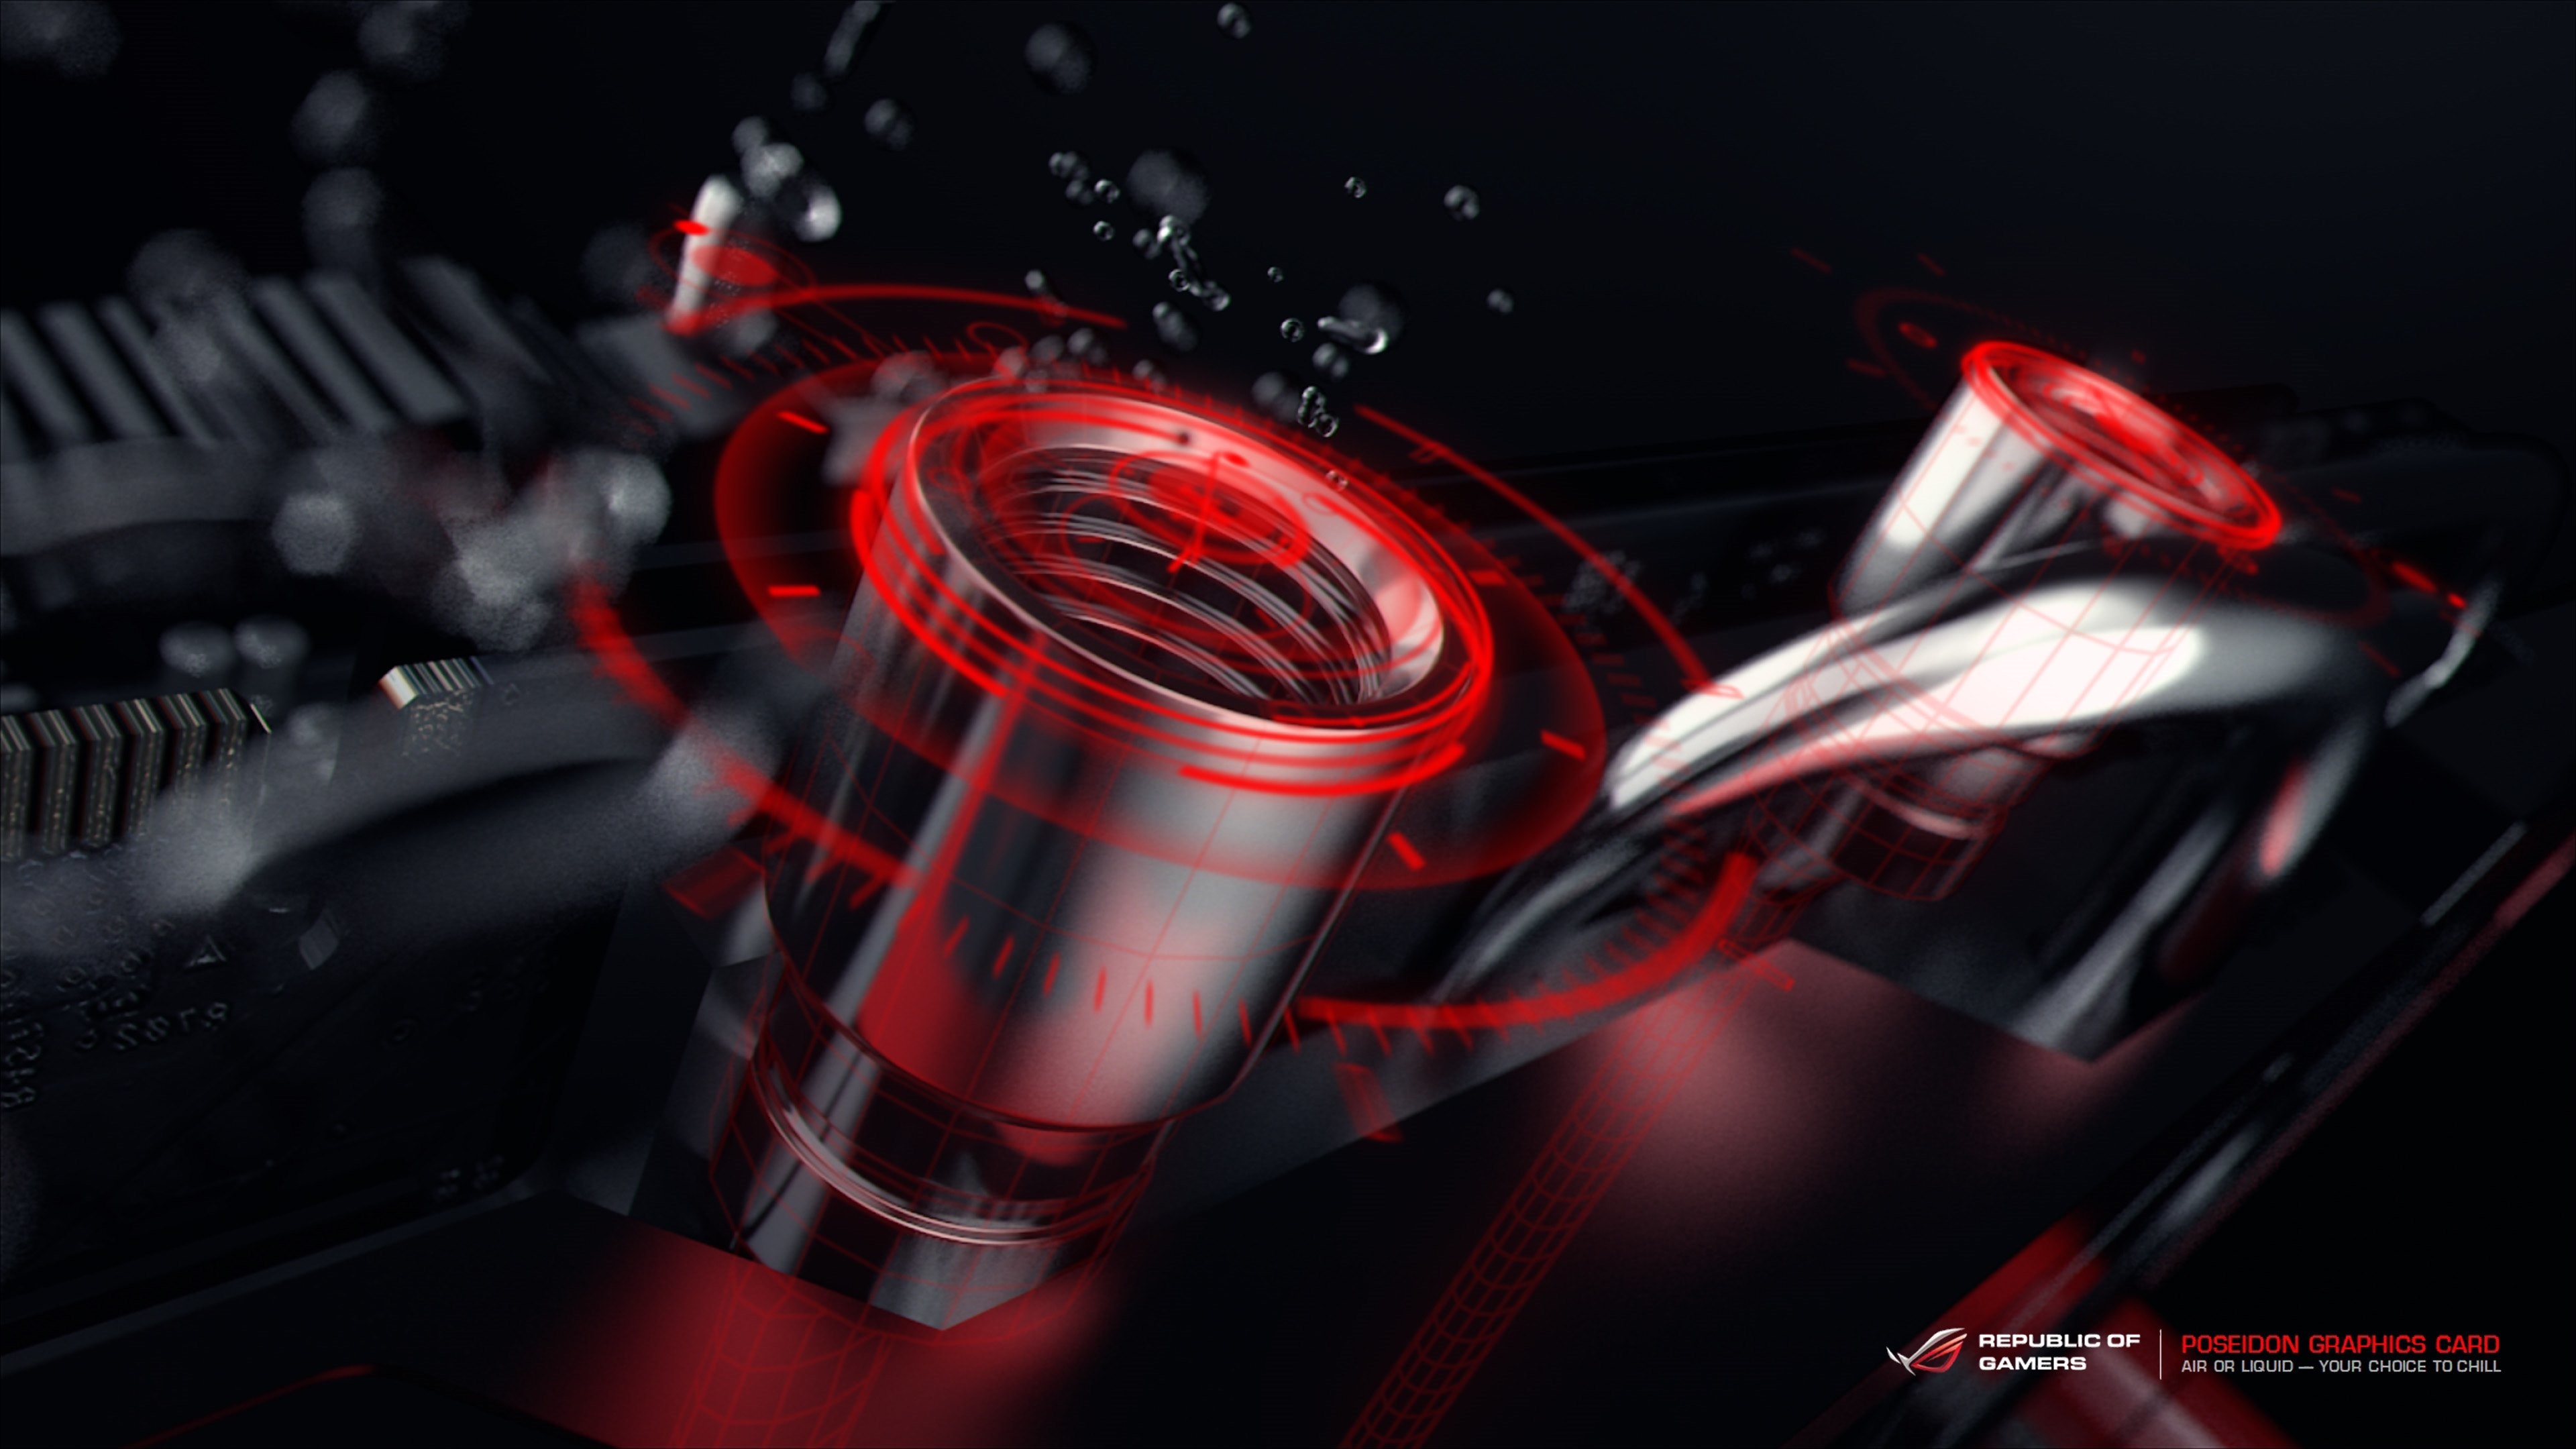 3840x2160 The official wallpapers for Asus Republic of Gamers featured in this post Â·  Download the ROG wallpapers from listed links in 4K, HD and wide sizes to  ...